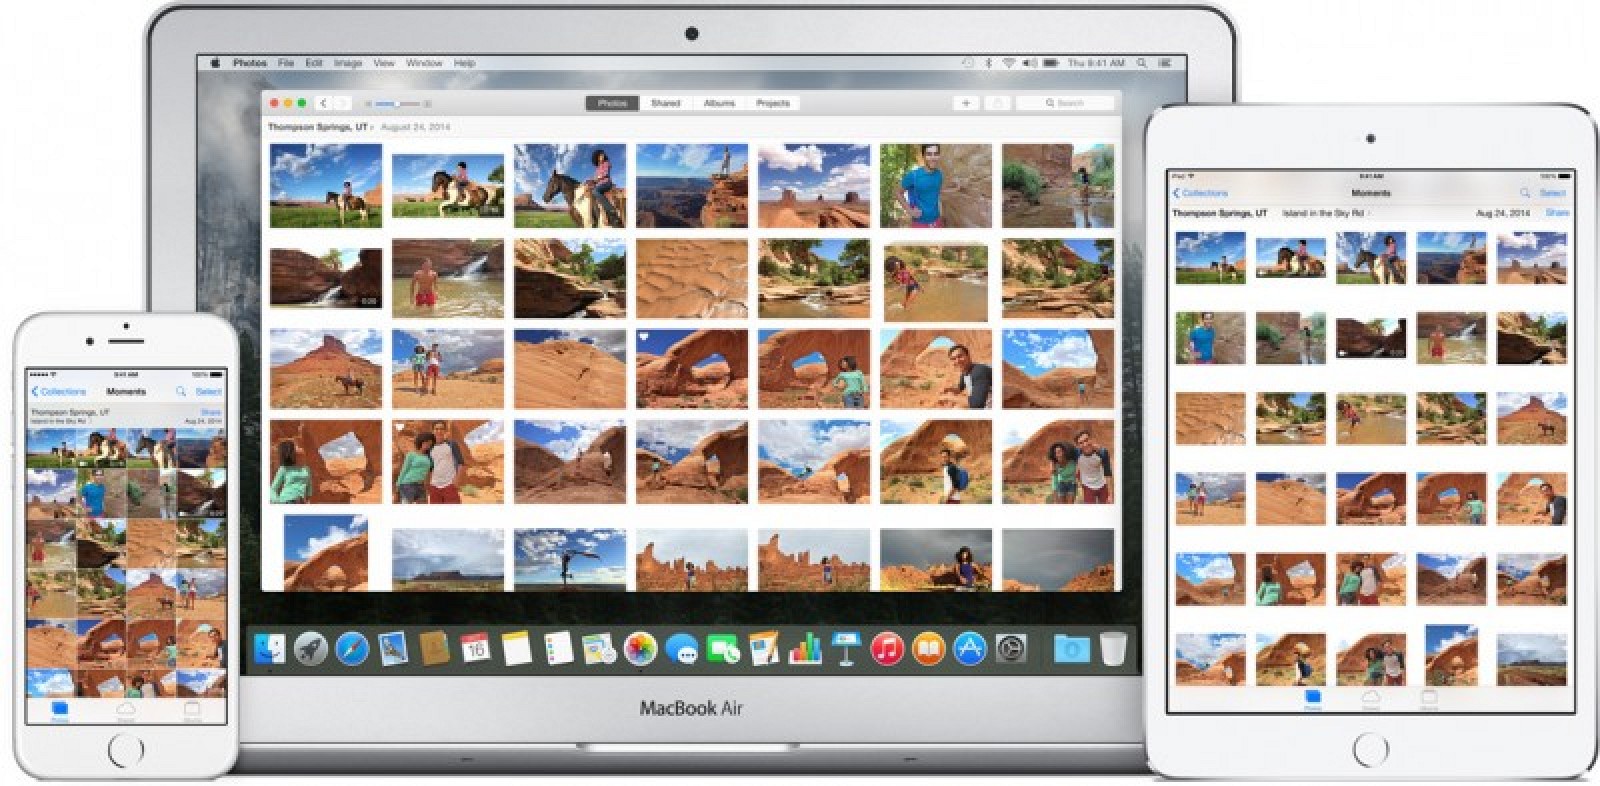 How do you download iPhoto to an iMac?